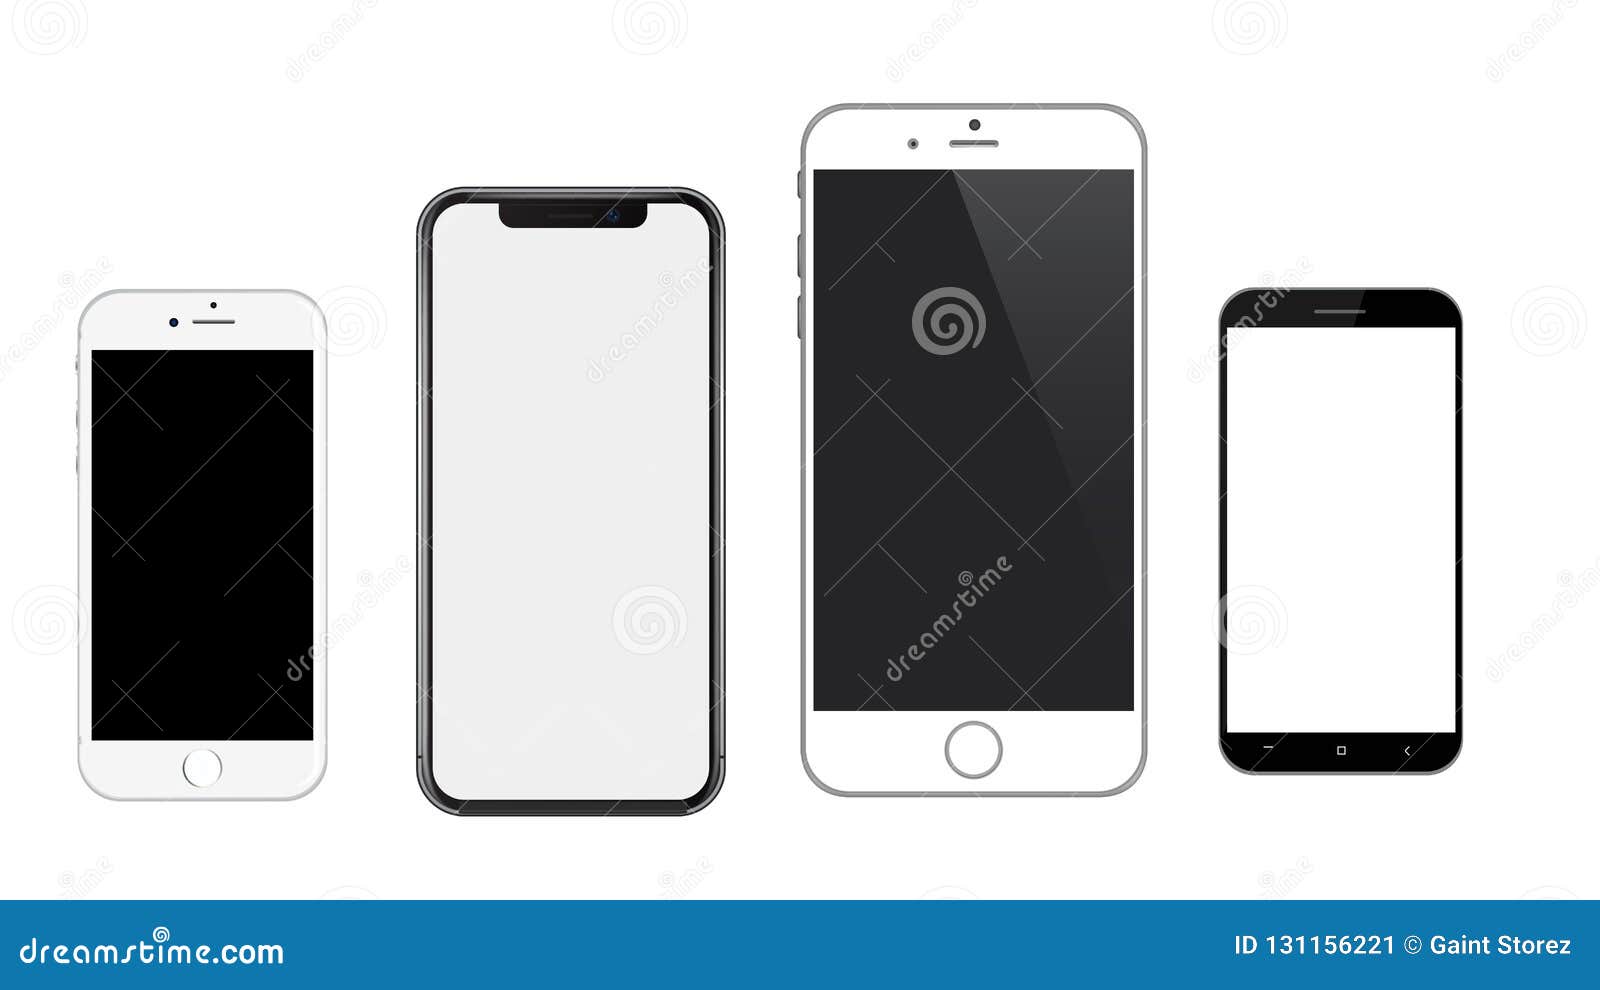 realistic  mobile phones mockup iphone & android